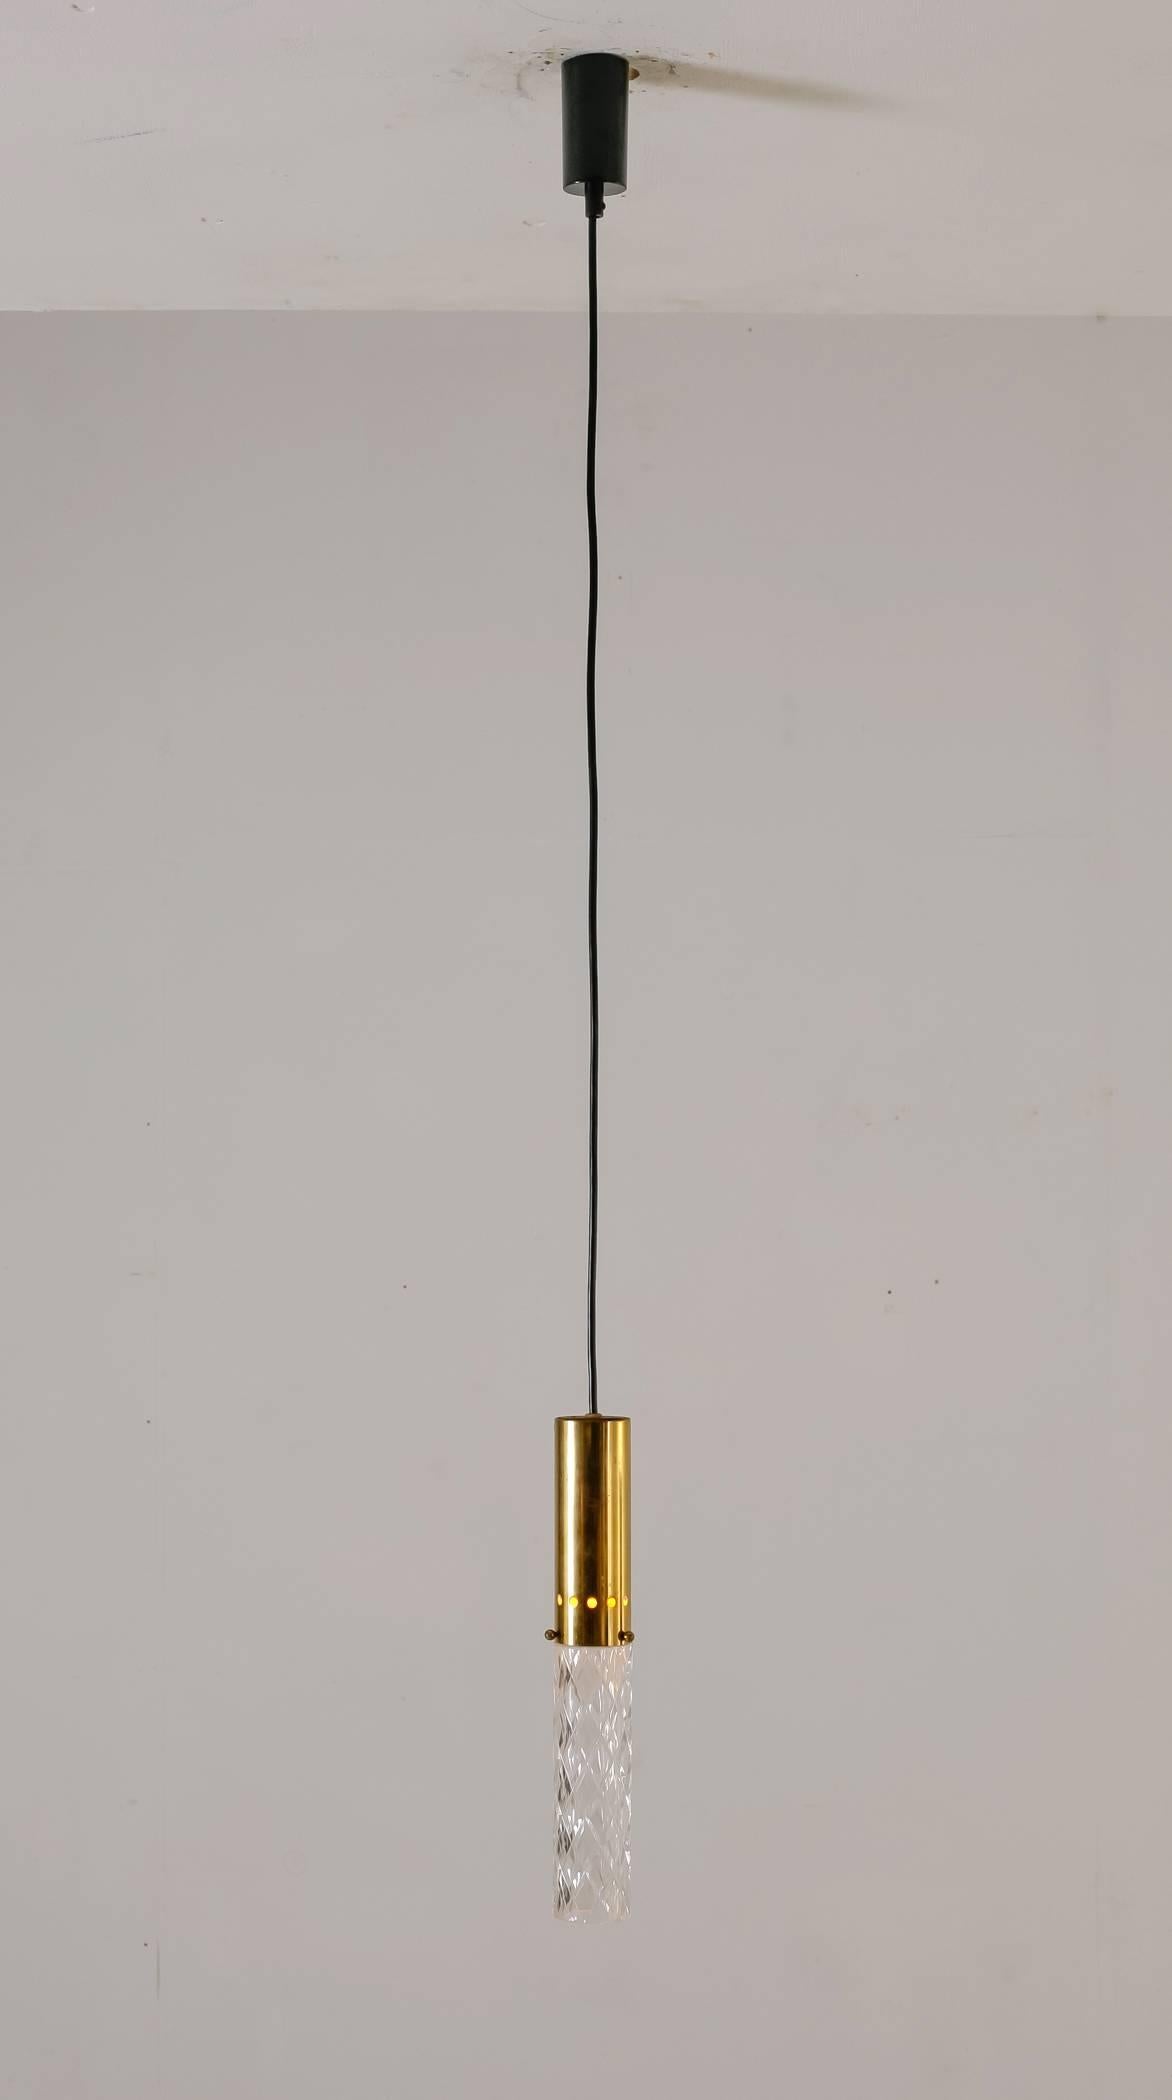 A set of three  thin, cylindricalpendant lamp from Italy, made of a brass base with a crystal diffuser attached to it. A minimalist yet elegant design.